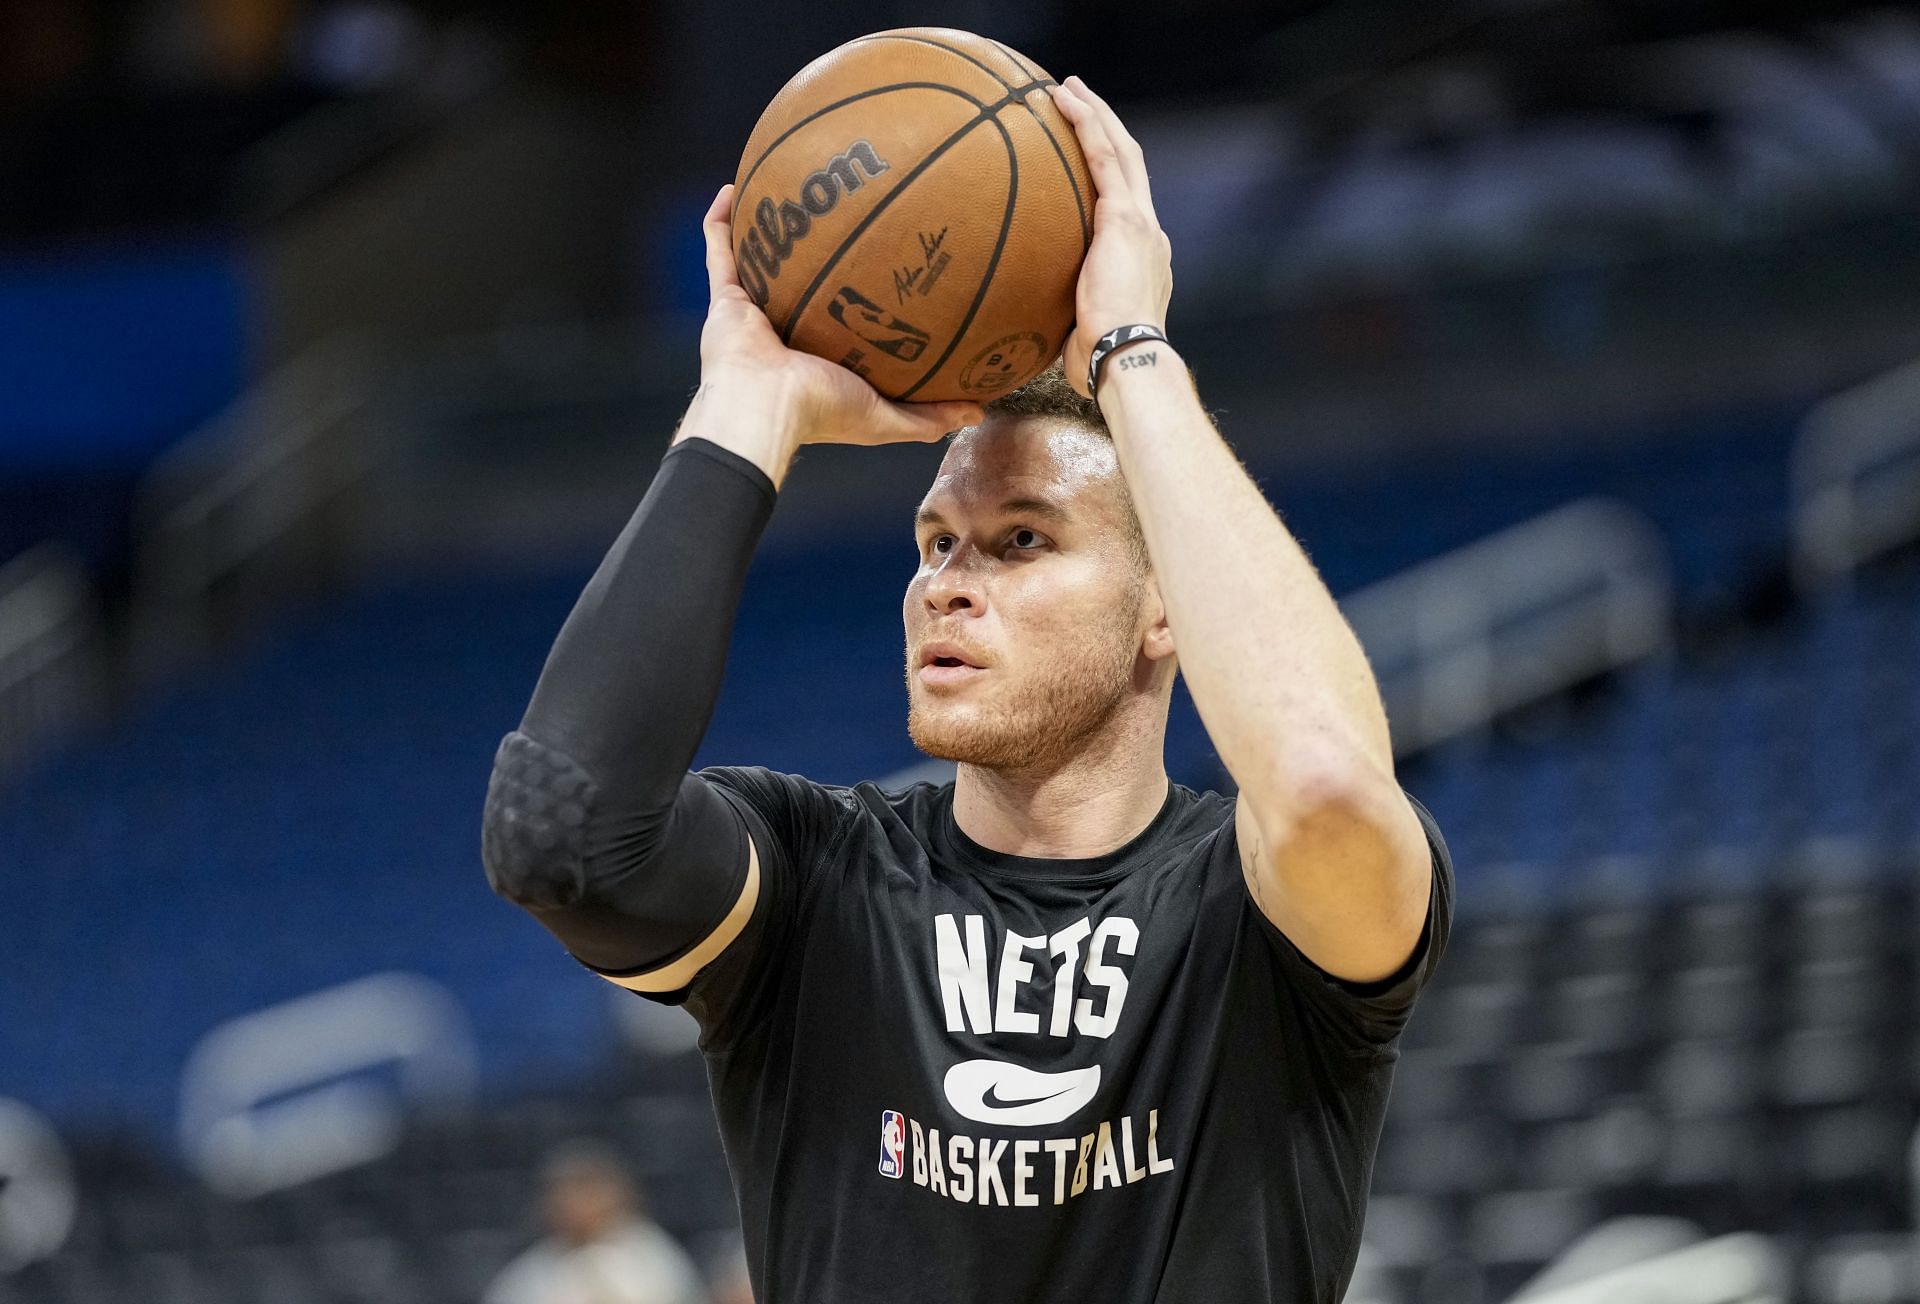 Blake Griffin of the Brooklyn Nets warms up